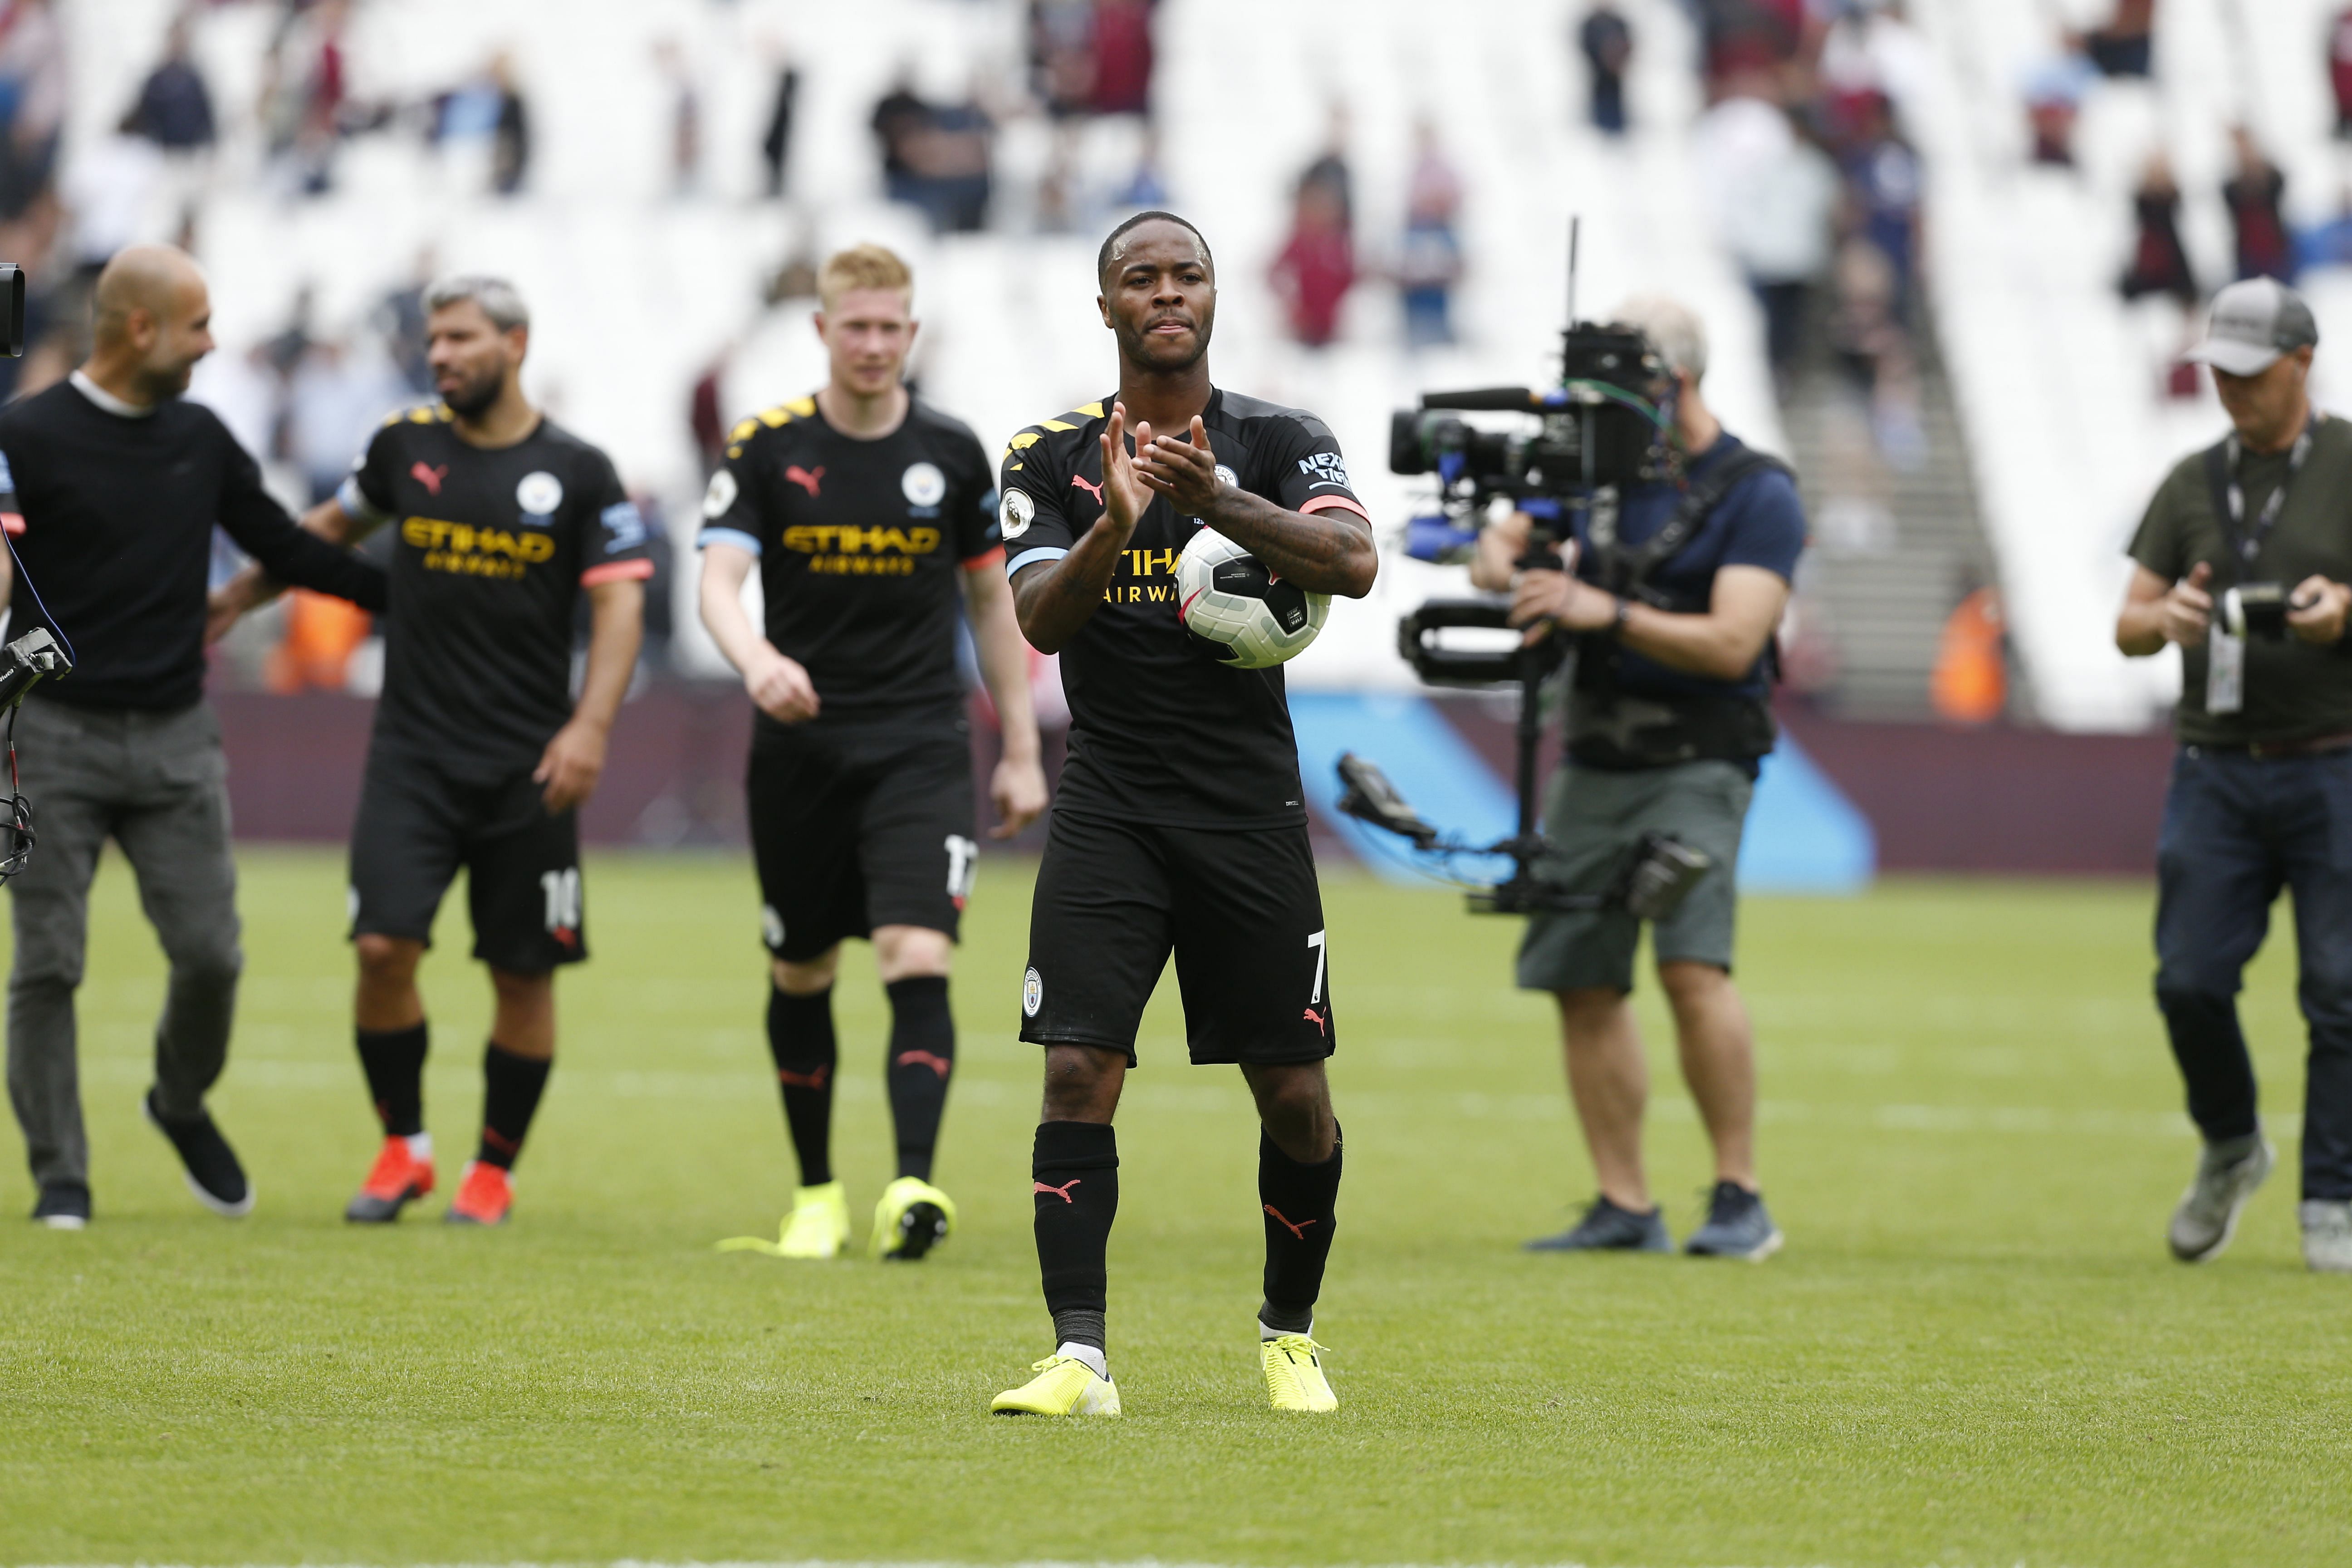 Manchester City's English midfielder Raheem Sterling applauds as he carries the match ball after scoring a hatttick to help his team win 5-0 during the English Premier League football match between West Ham United and Manchester City. (AFP Photo)